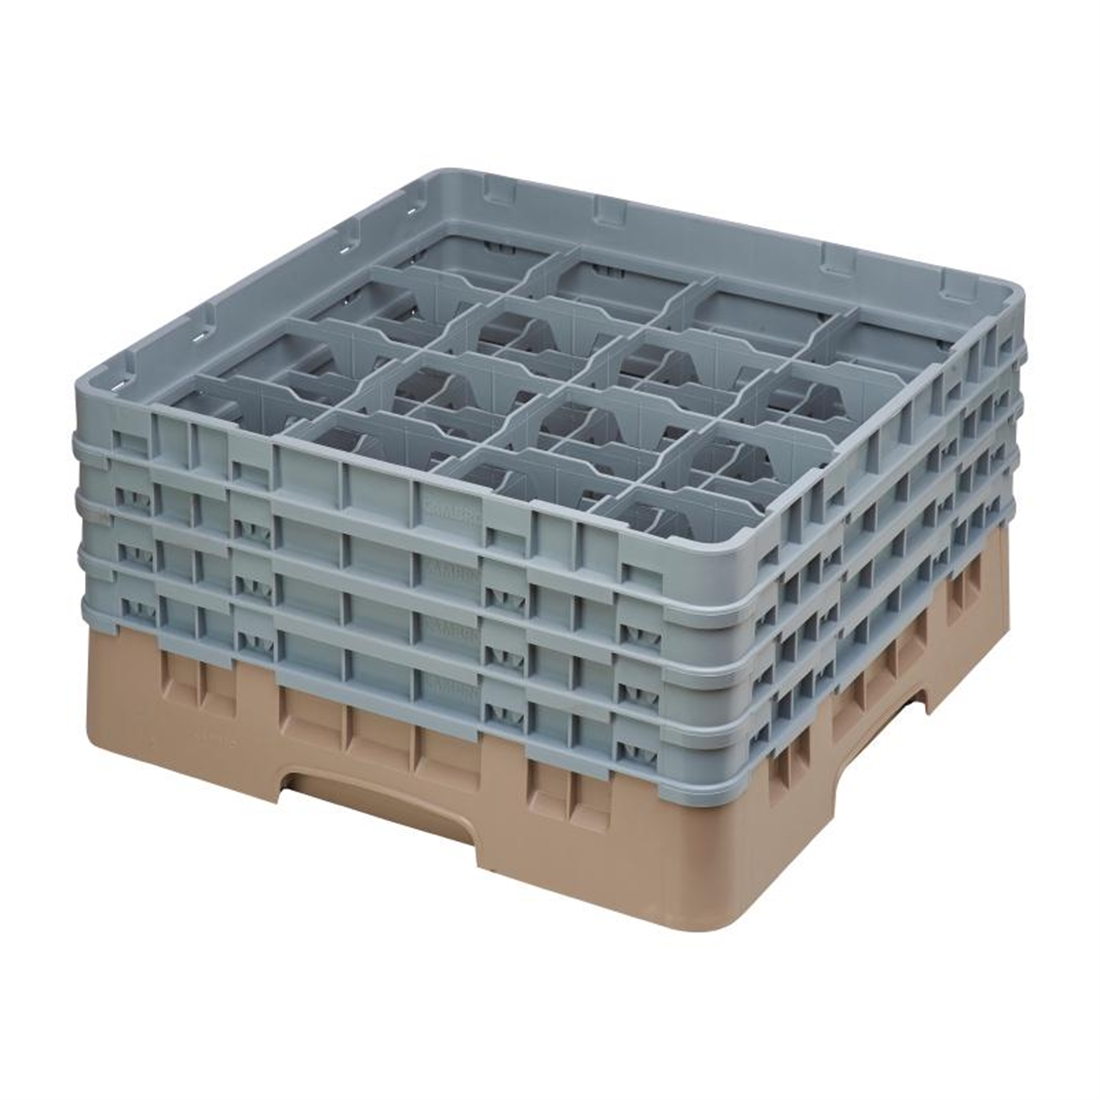 Cambro Camrack Beige 16 Compartments Max Glass Height 215mm